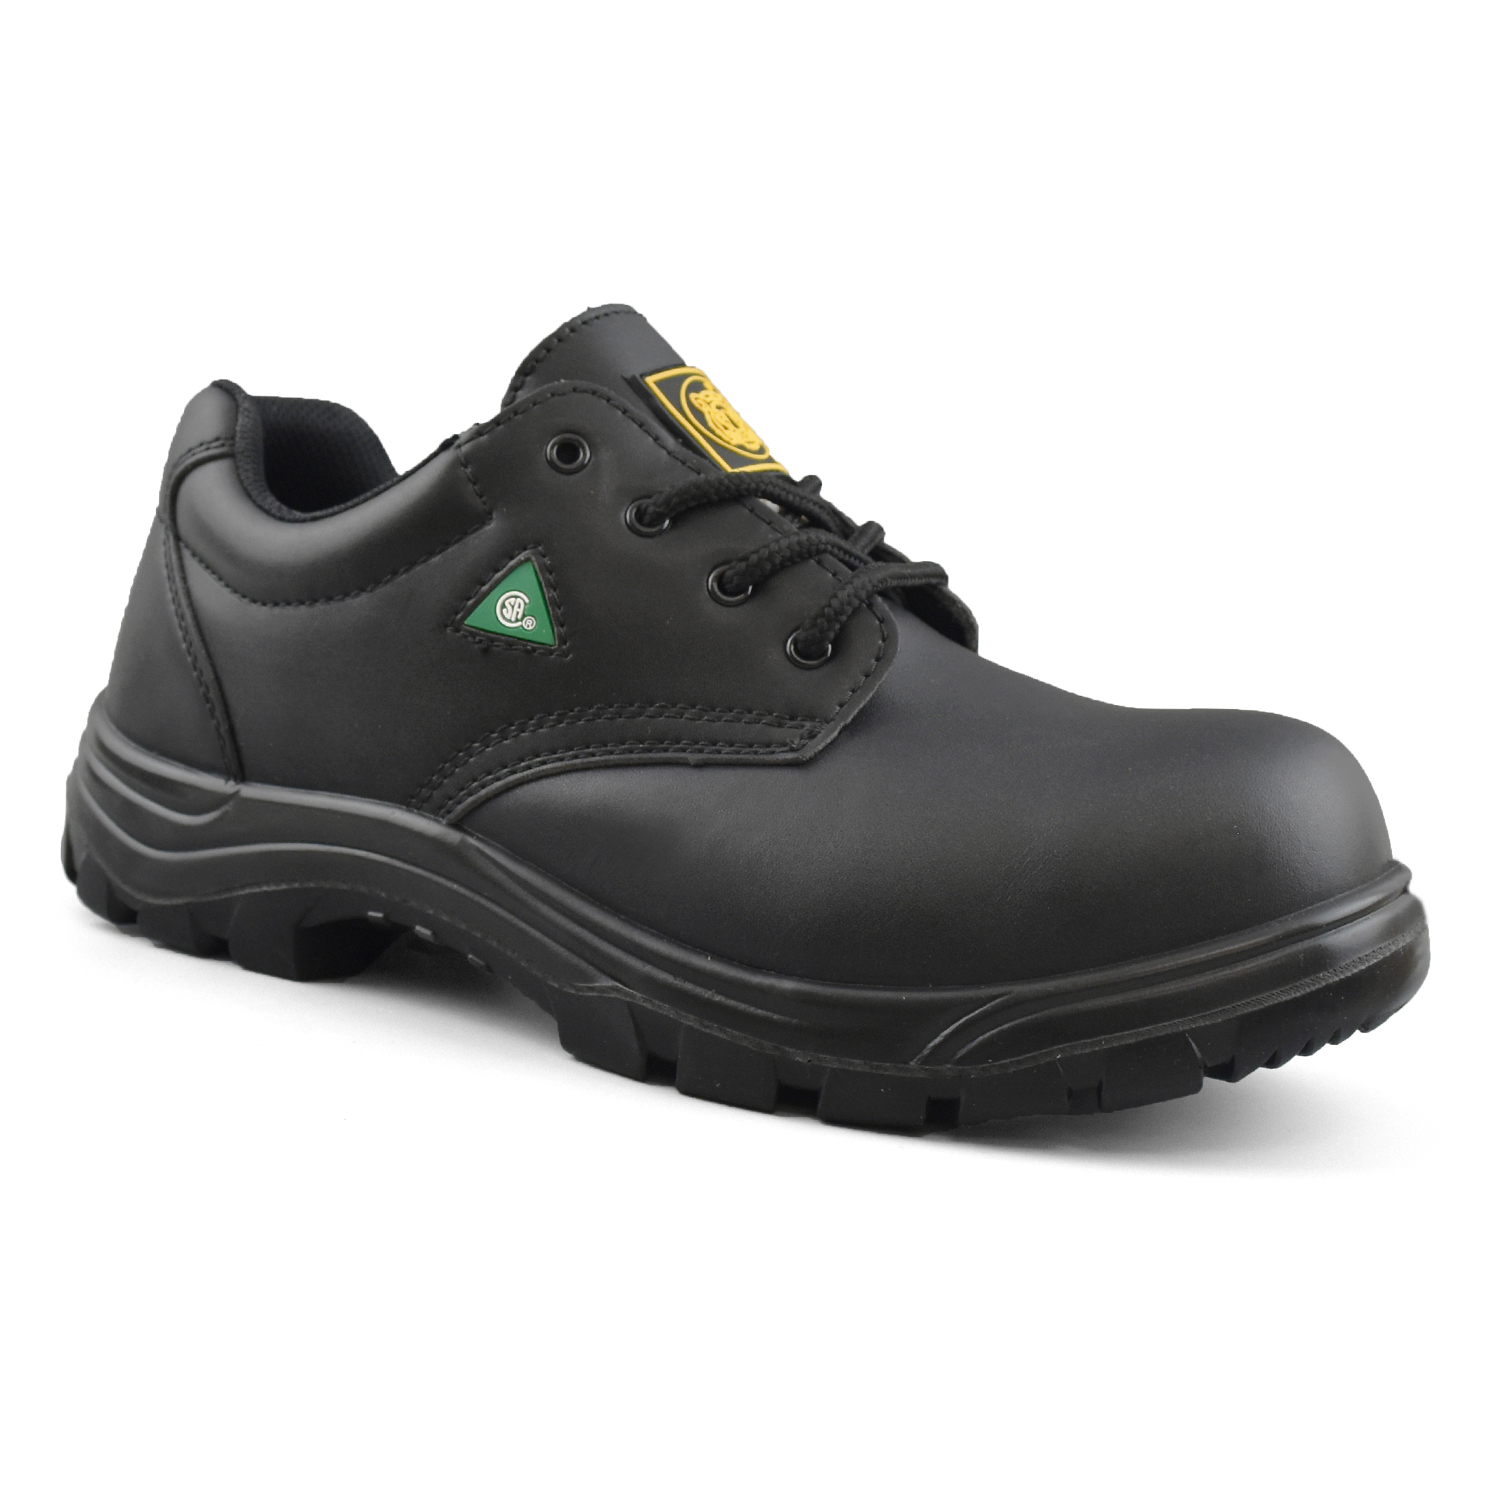 safety shoes tiger brand price